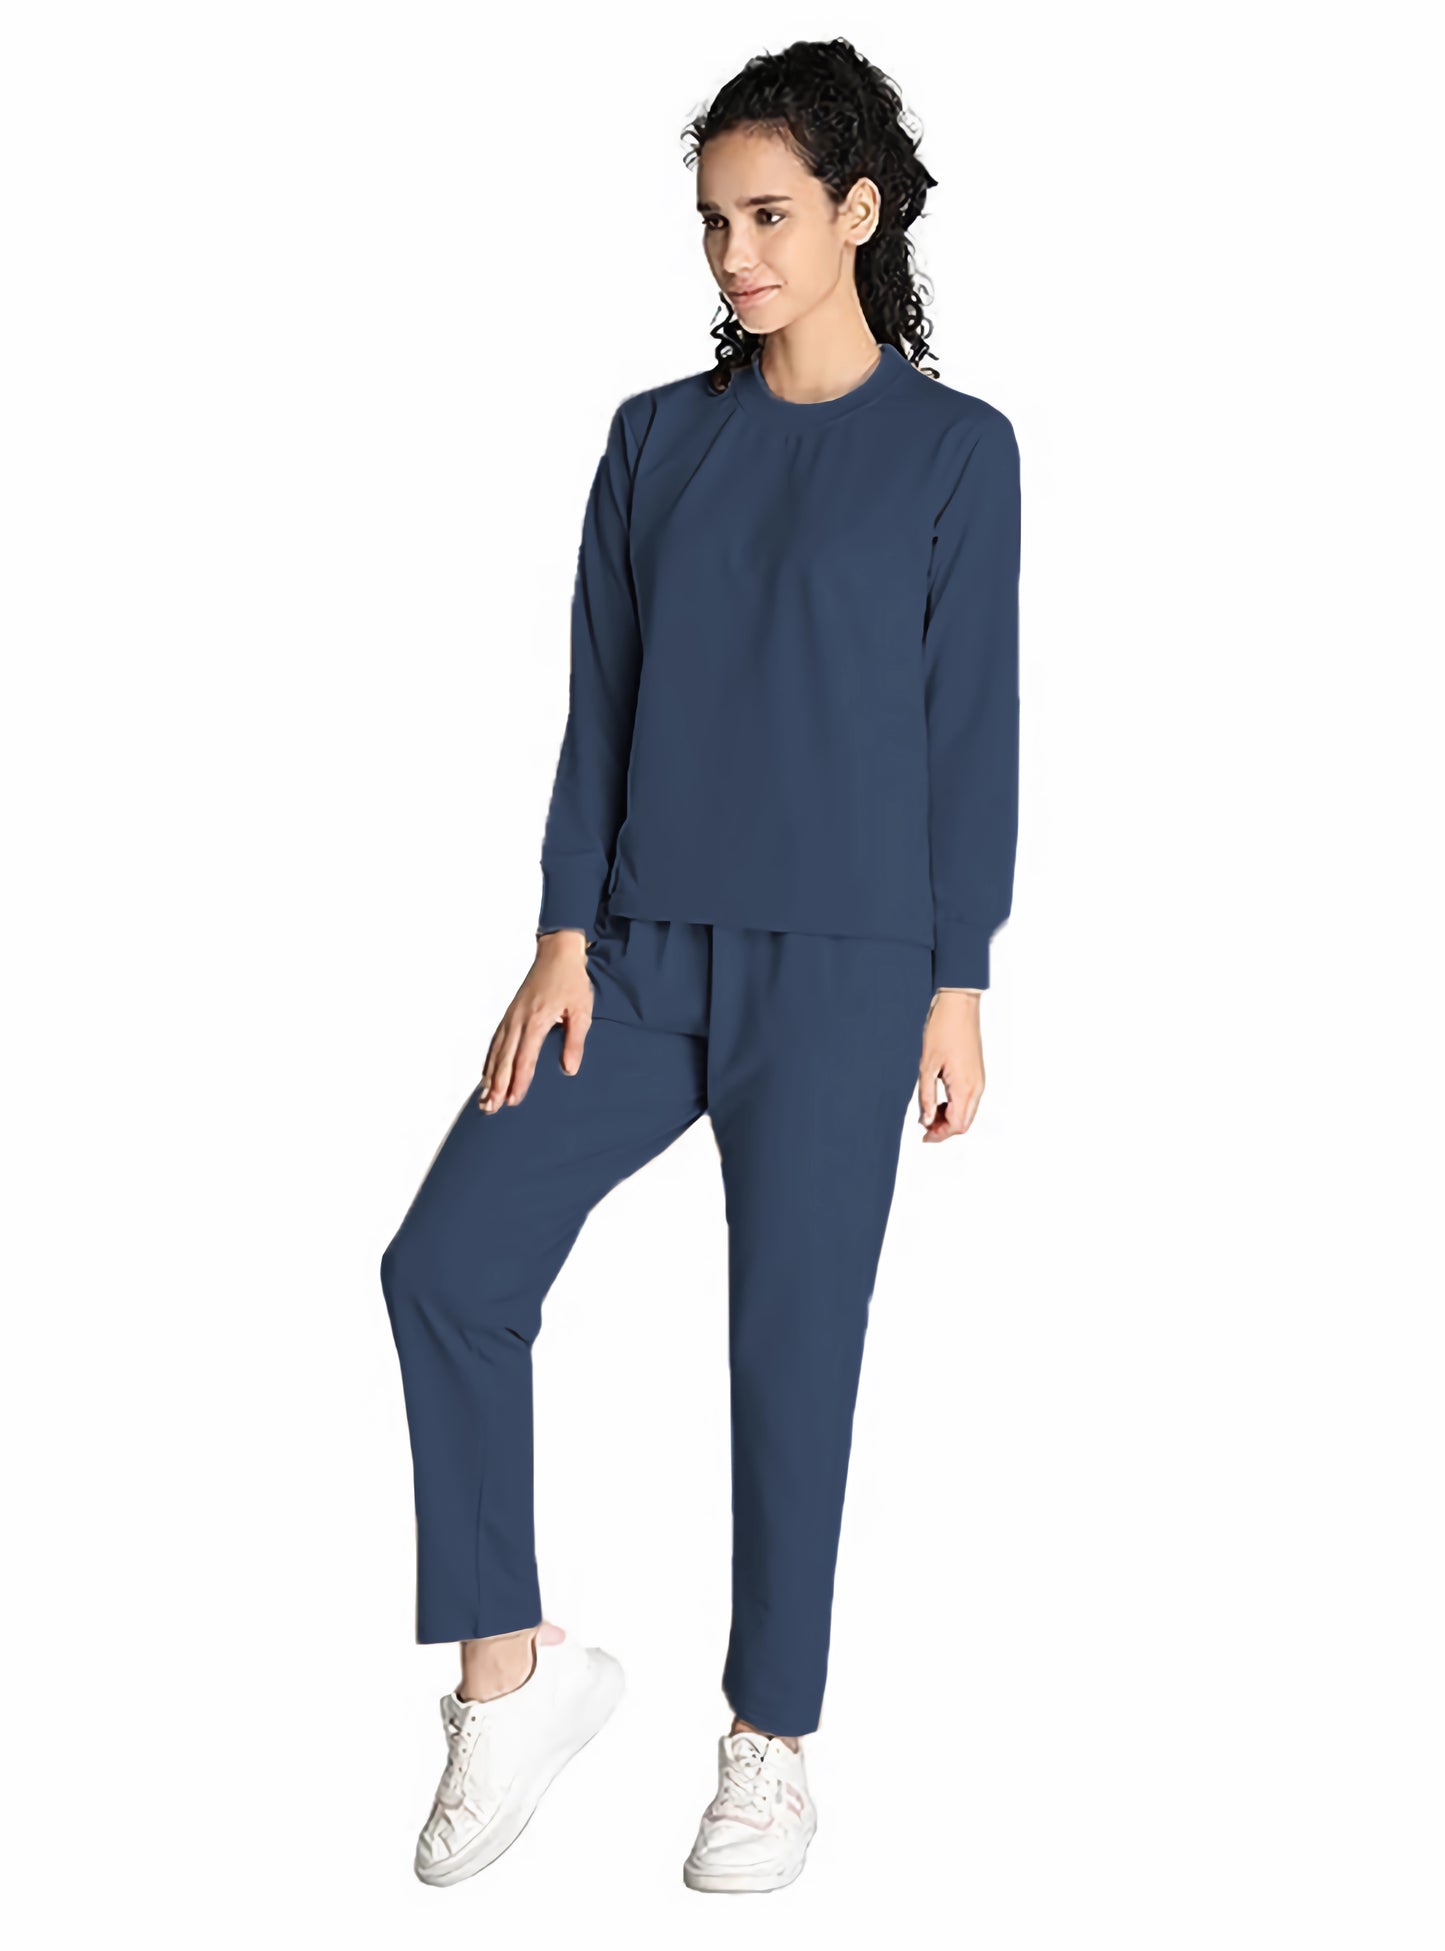 Women Casual Track Suit Co-ord Sets